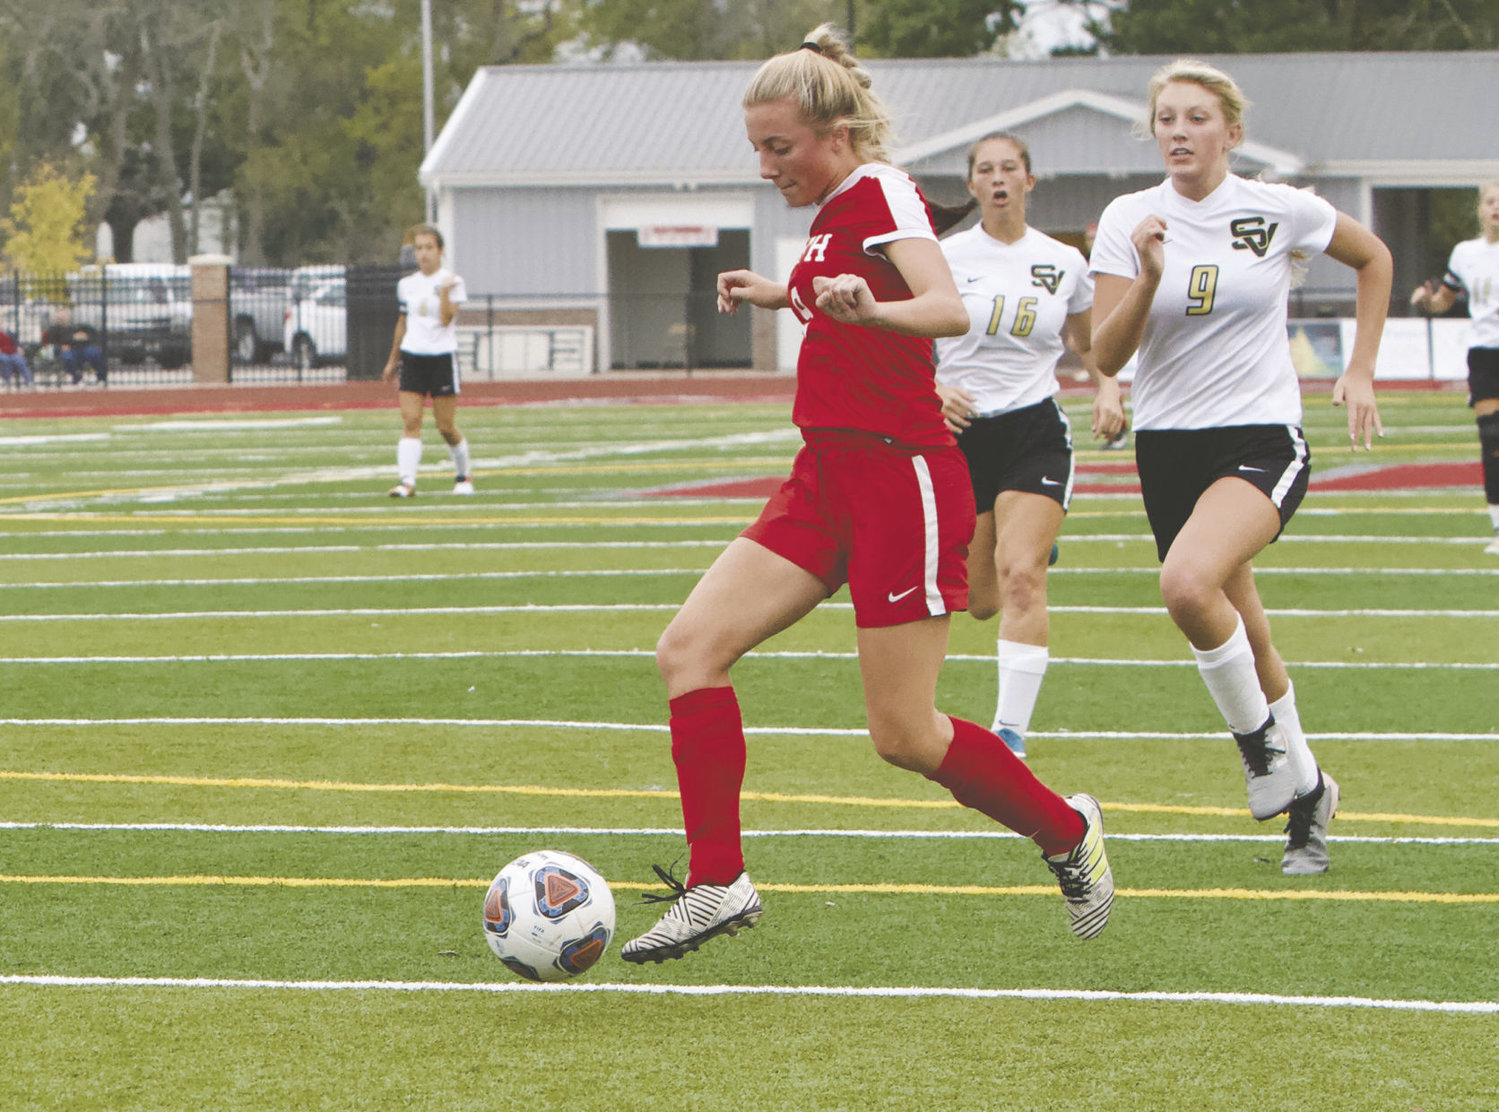 Lexie Odum's five-goal performance led Southmont past South Vermillion in the sectional opener on Thursday.